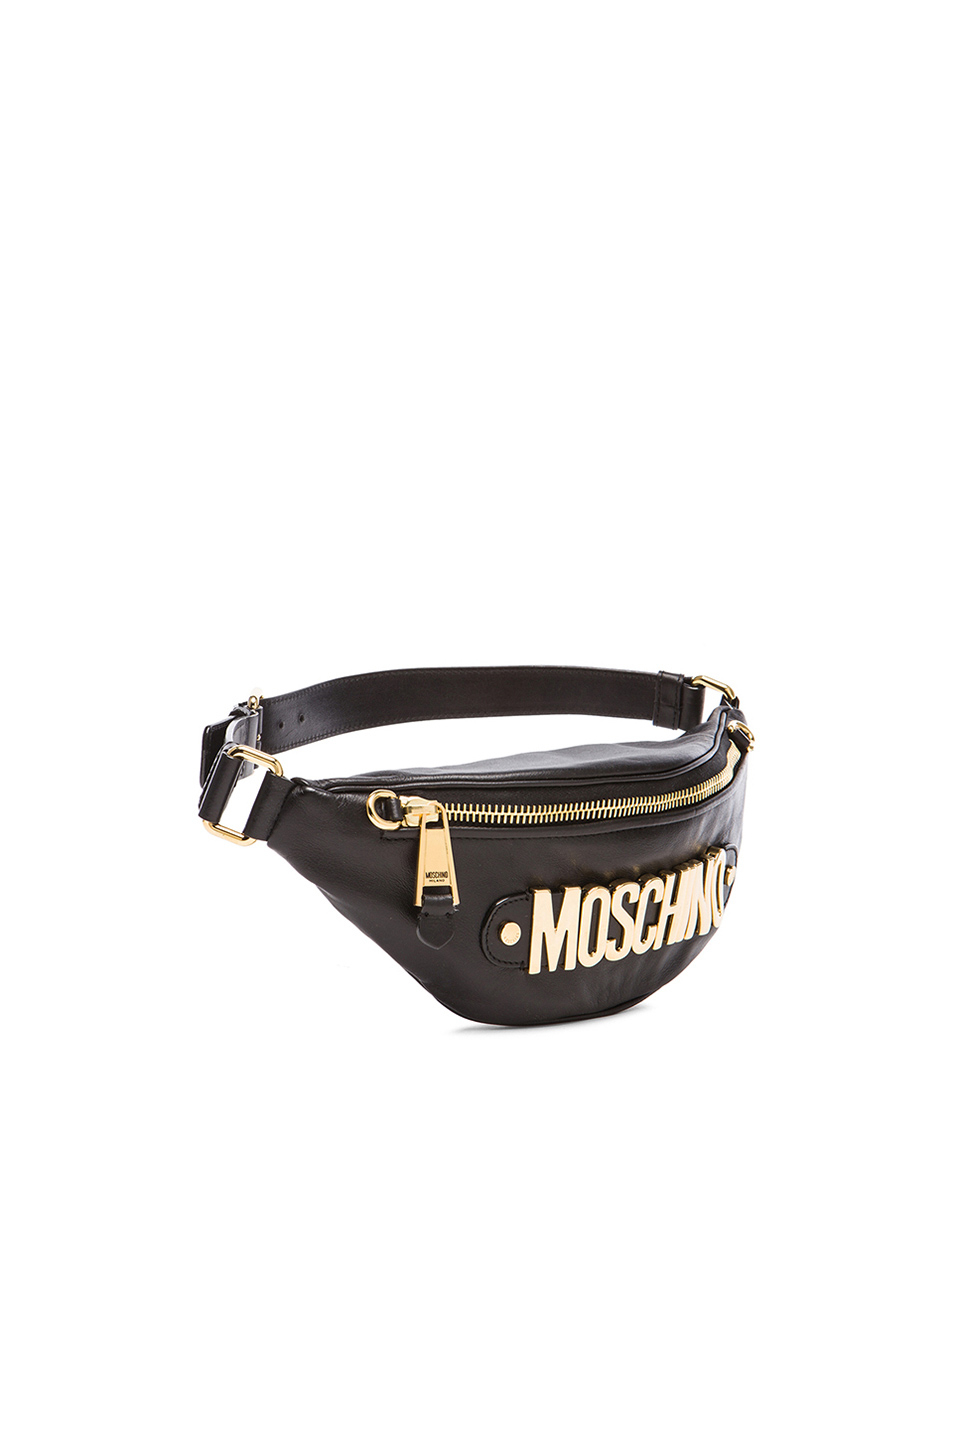 Moschino Logo Fanny Pack in Black - Lyst